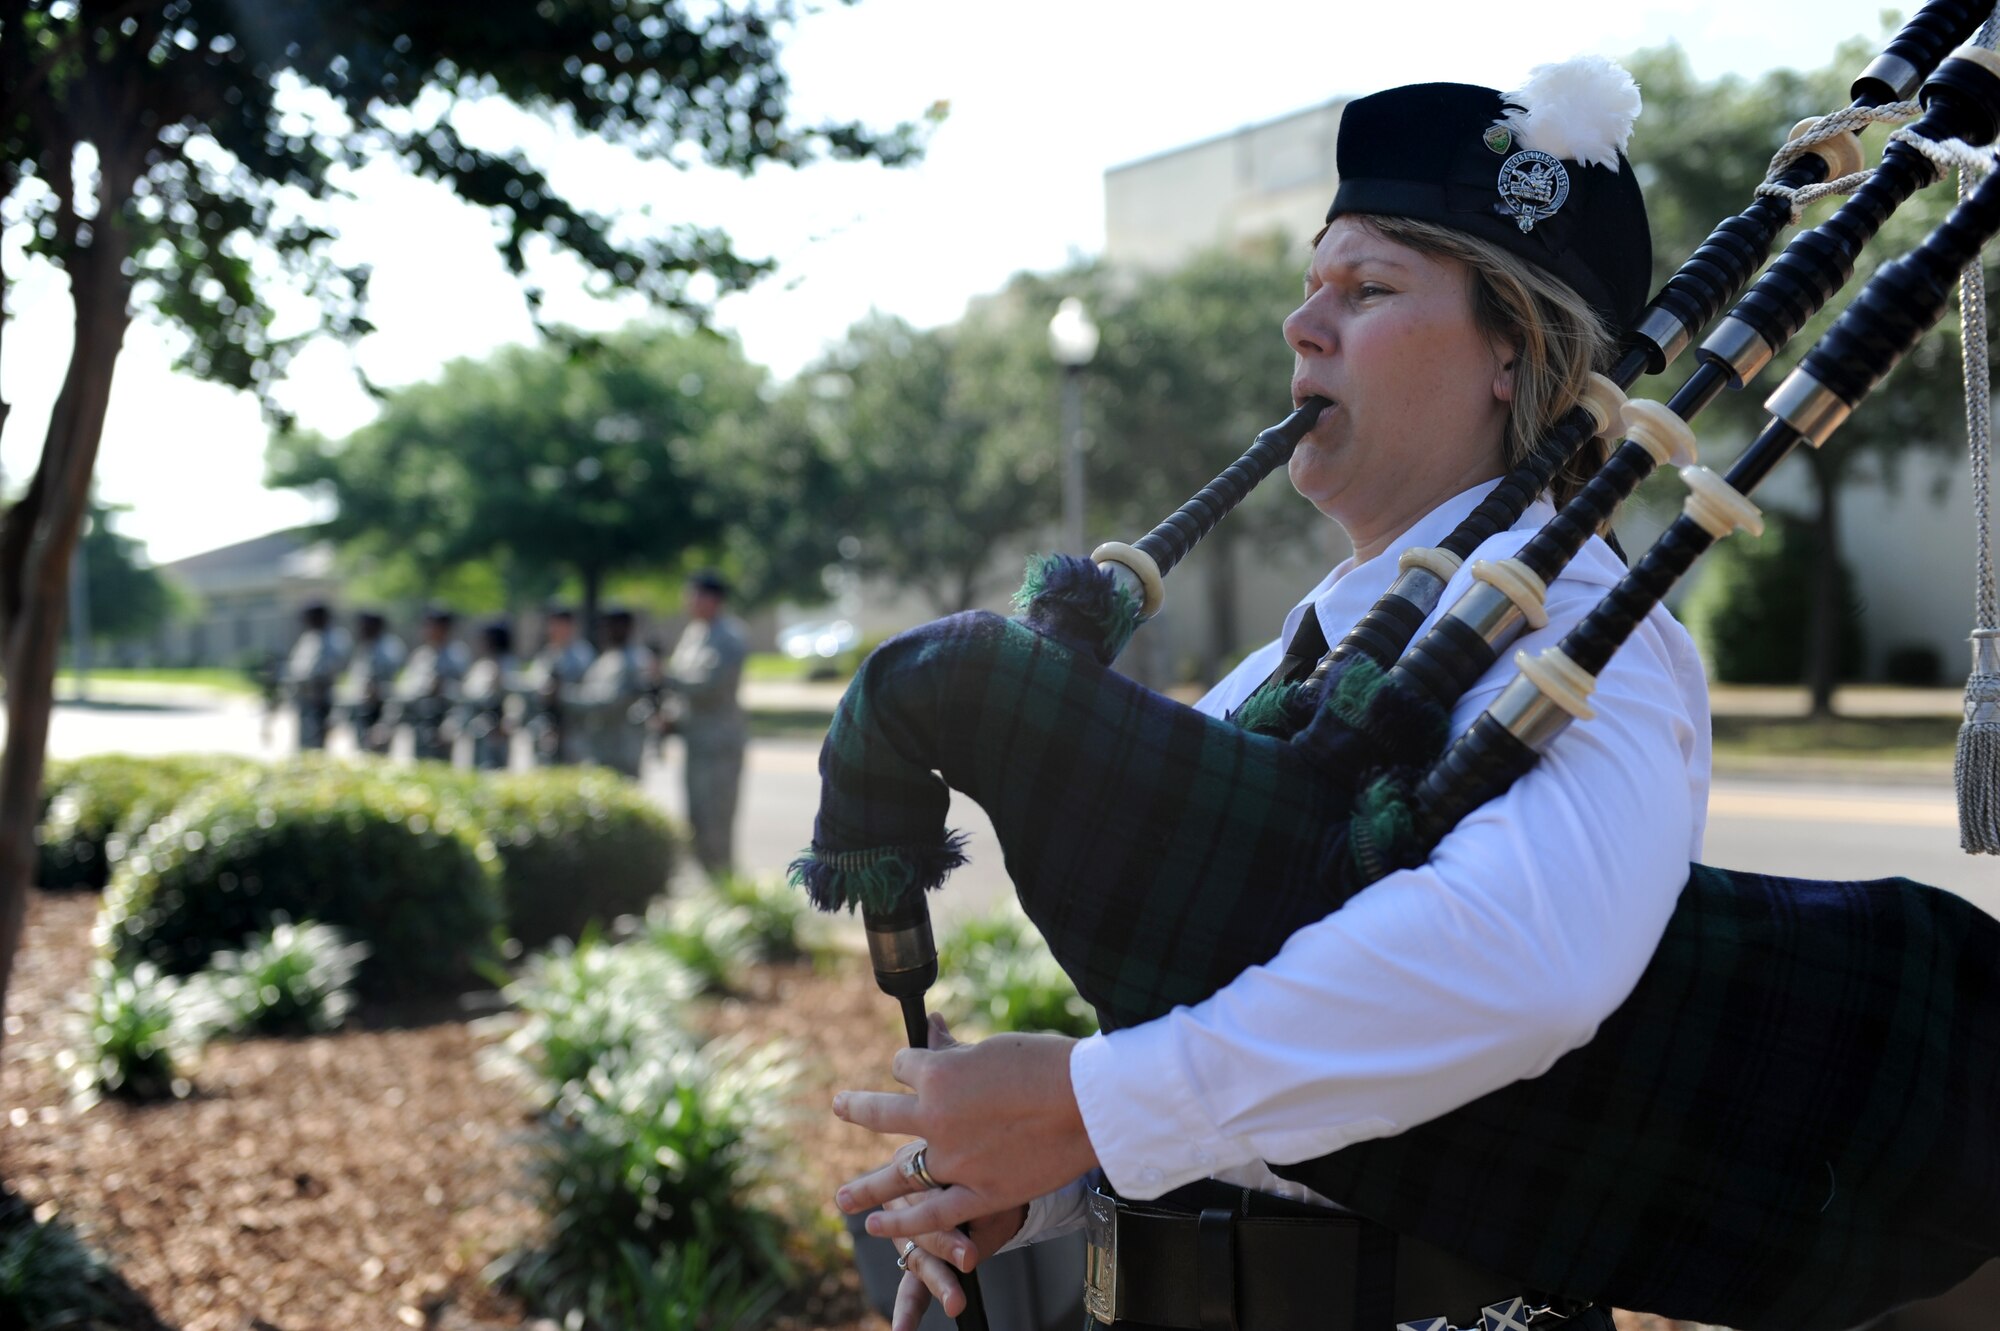 Elizabeth Doss, bagpipe player, plays taps during the 81st Security Forces Squadron Retreat Ceremony May 19, 2016, Keesler Air Force Base, Miss. The ceremony was held during National Police Week, which recognizes the service of law enforcement men and women who put their lives at risk every day. (U.S. Air Force photo by Kemberly Groue)